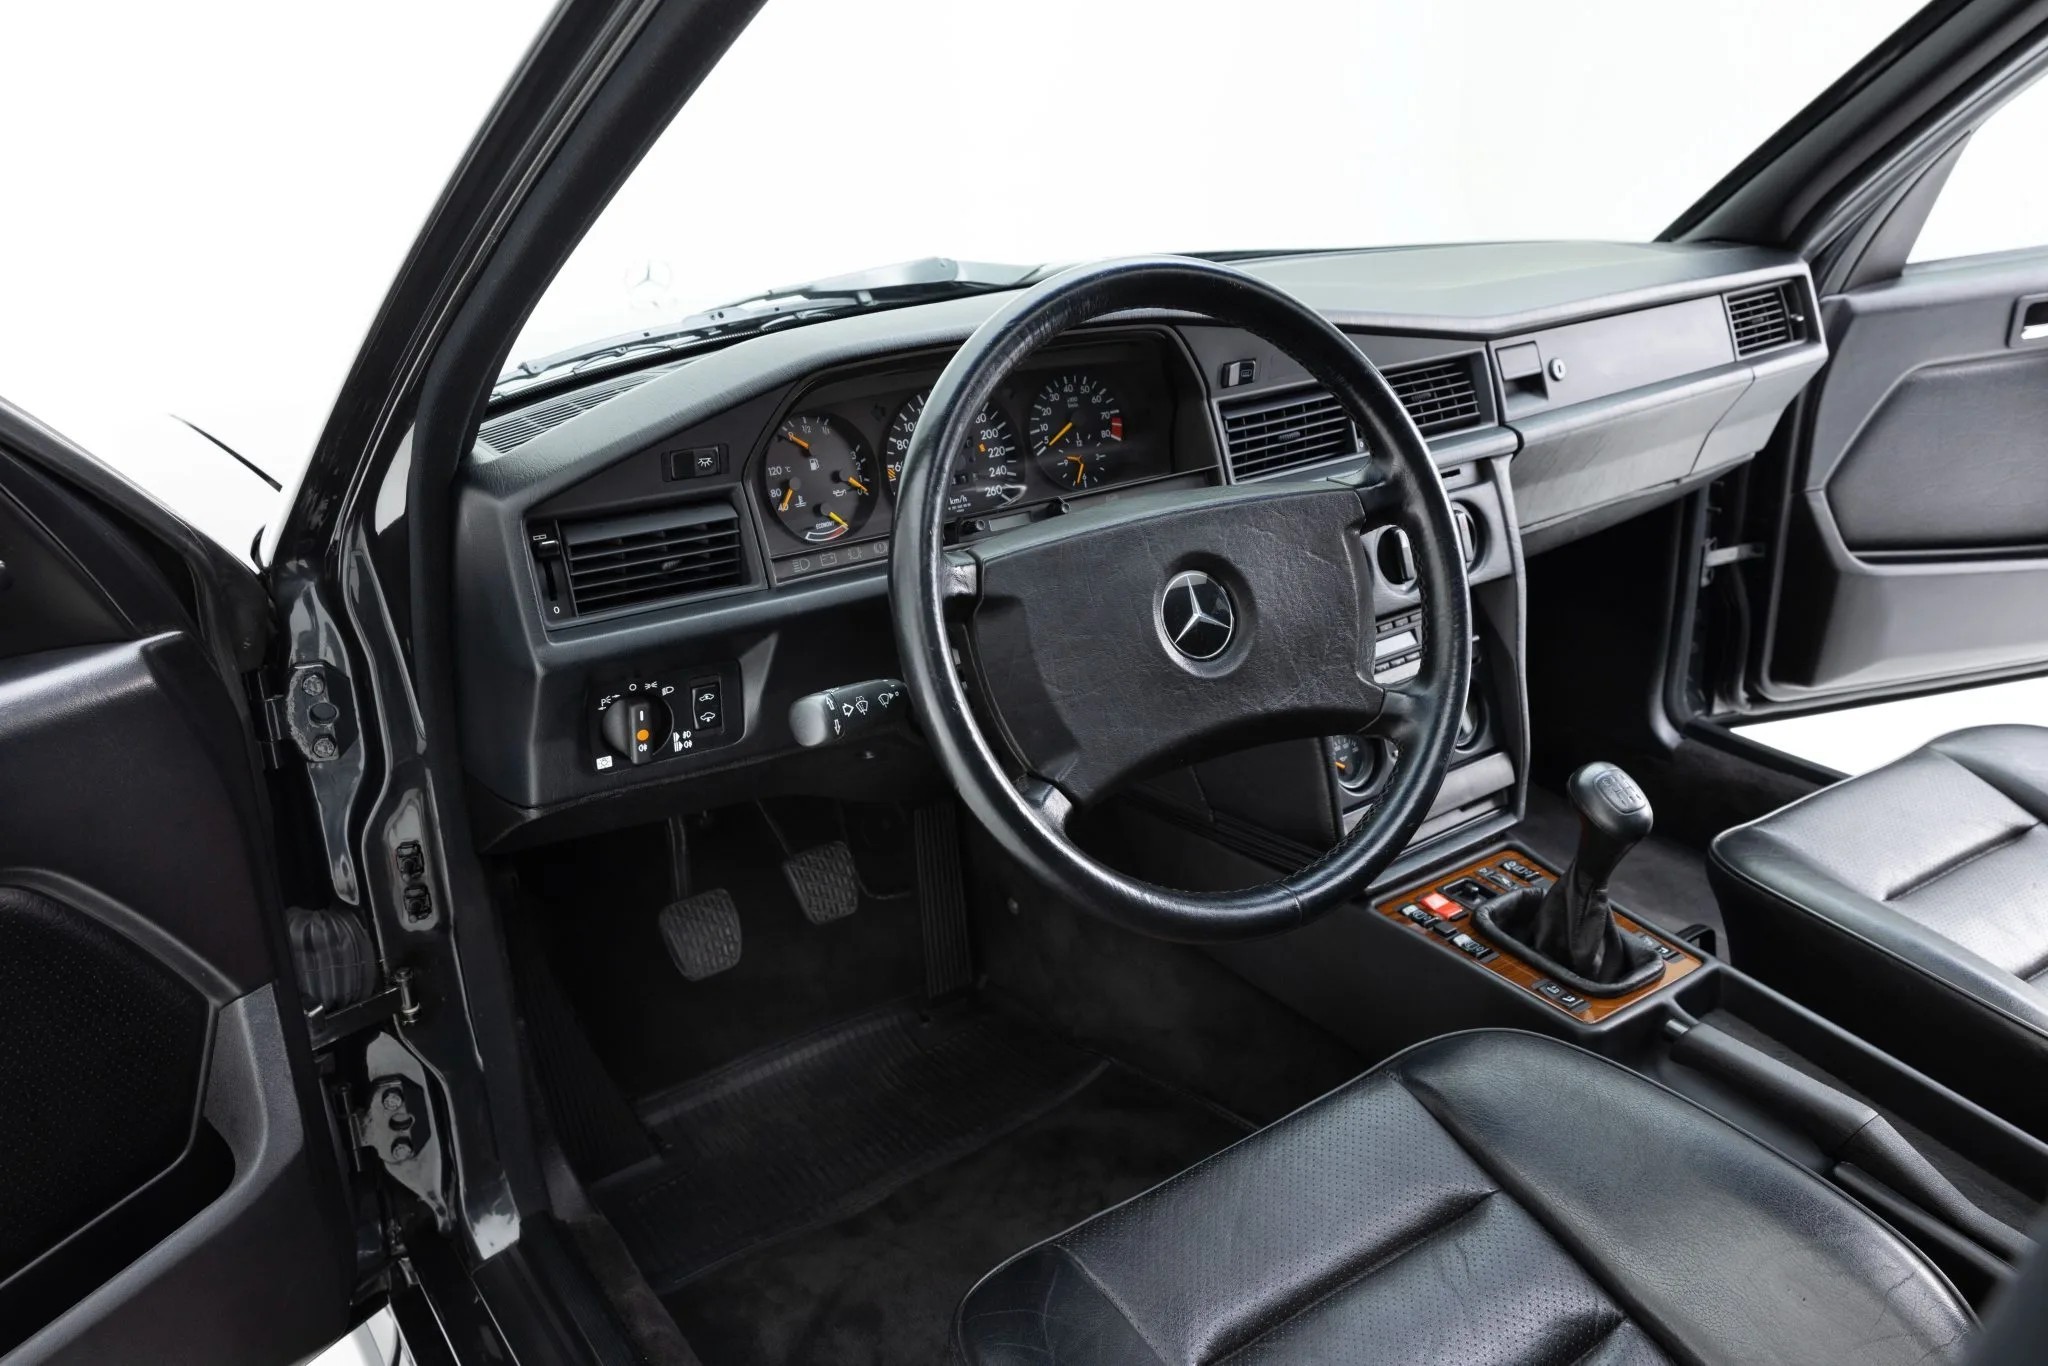 1989 Mercedes-Benz 190E 2.5–16 Evolution I Is a Time Capsule from the  Golden Age of Racing - autoevolution